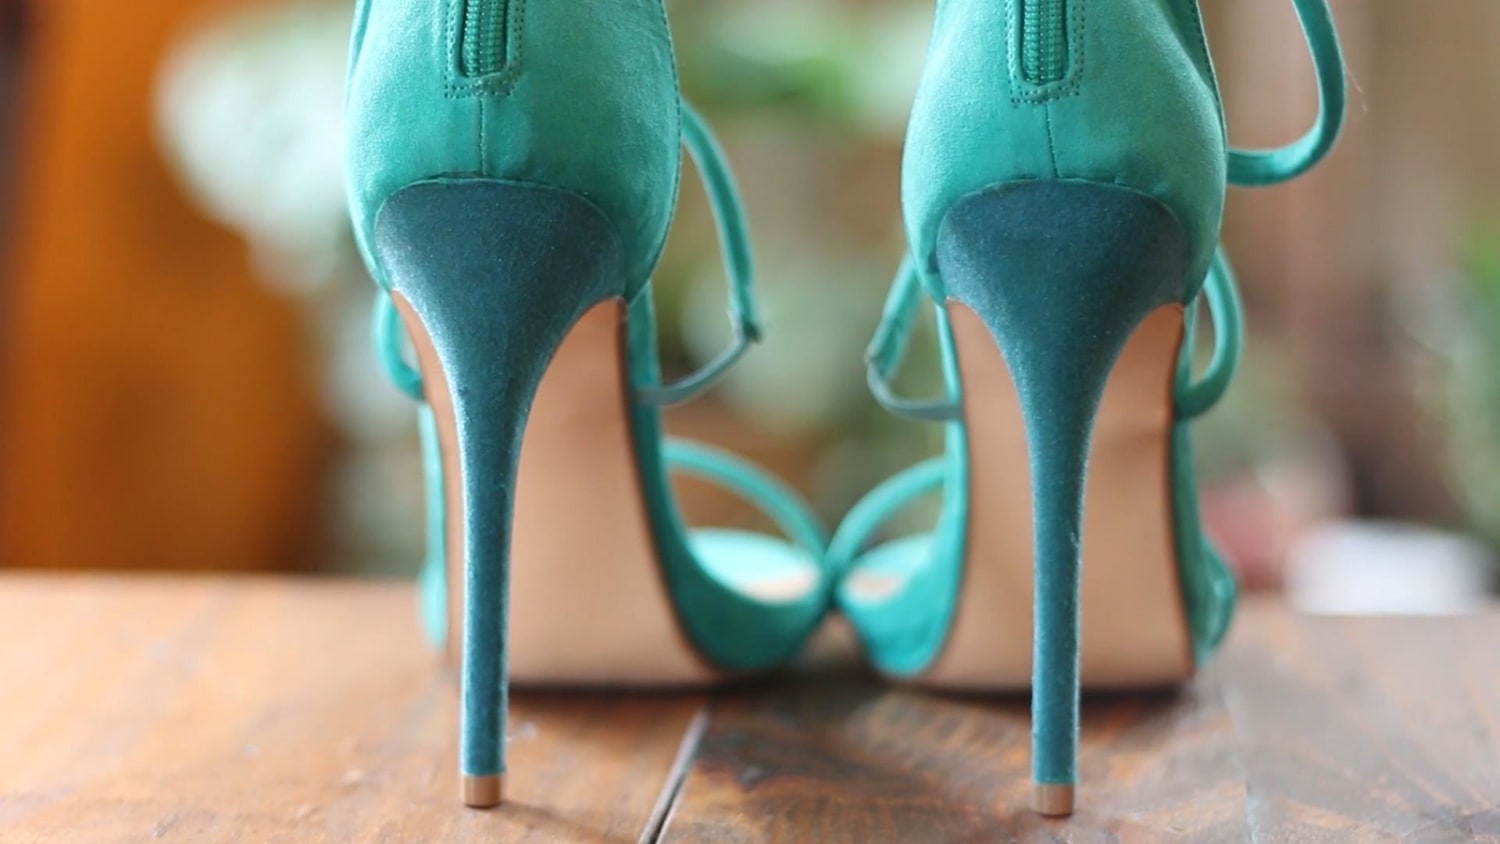 How To Match Your Shoes With The Dress - Tips Every Girl Should Know